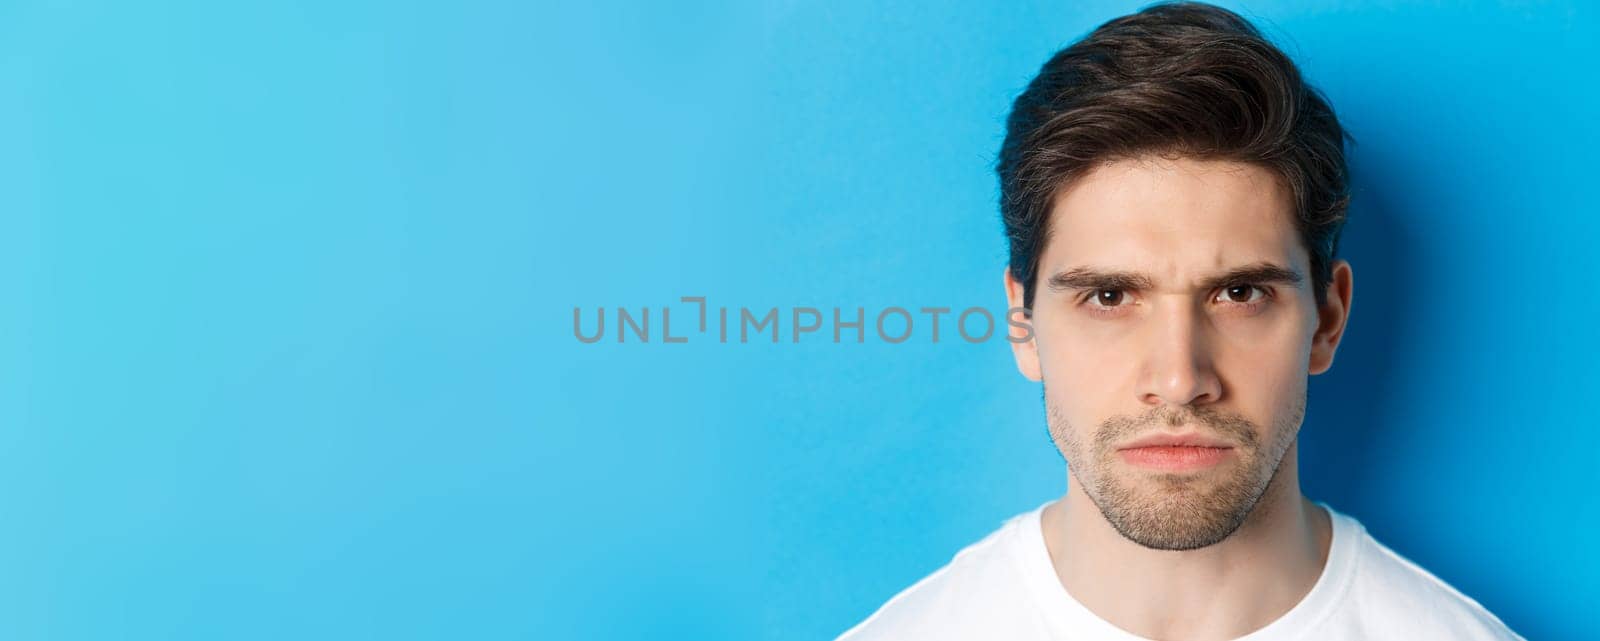 Headshot of angry man frowning, looking disappointed and bothered, standing over blue background by Benzoix